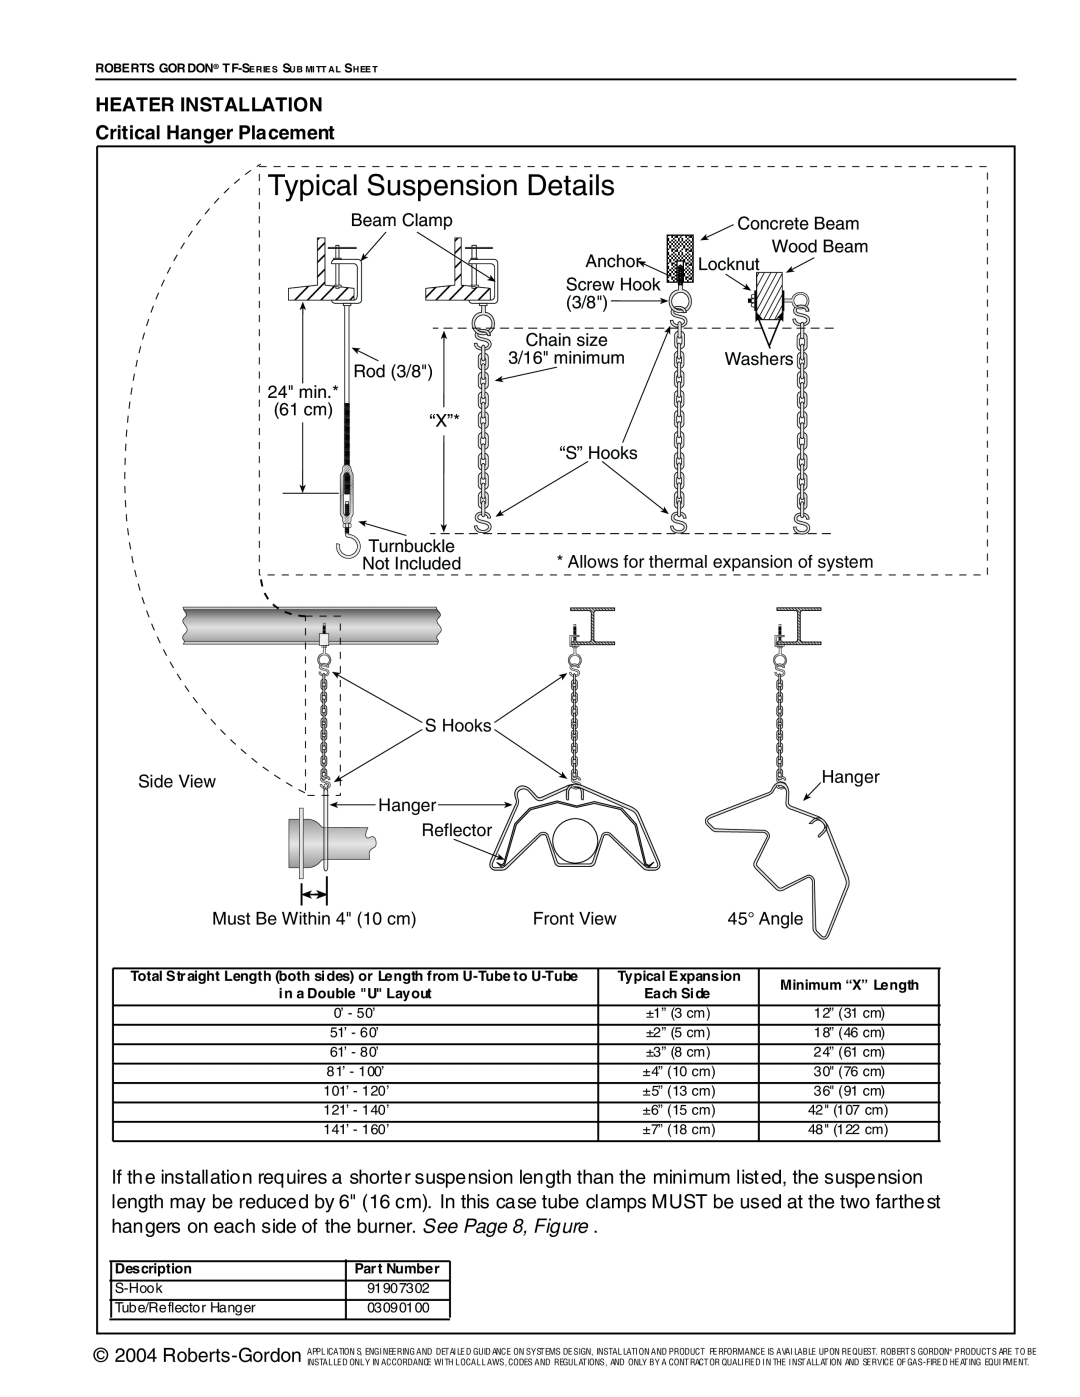 Roberts Gorden TF-Series service manual Typical Suspension Details, HEATER INSTALLATION Critical Hanger Placement 